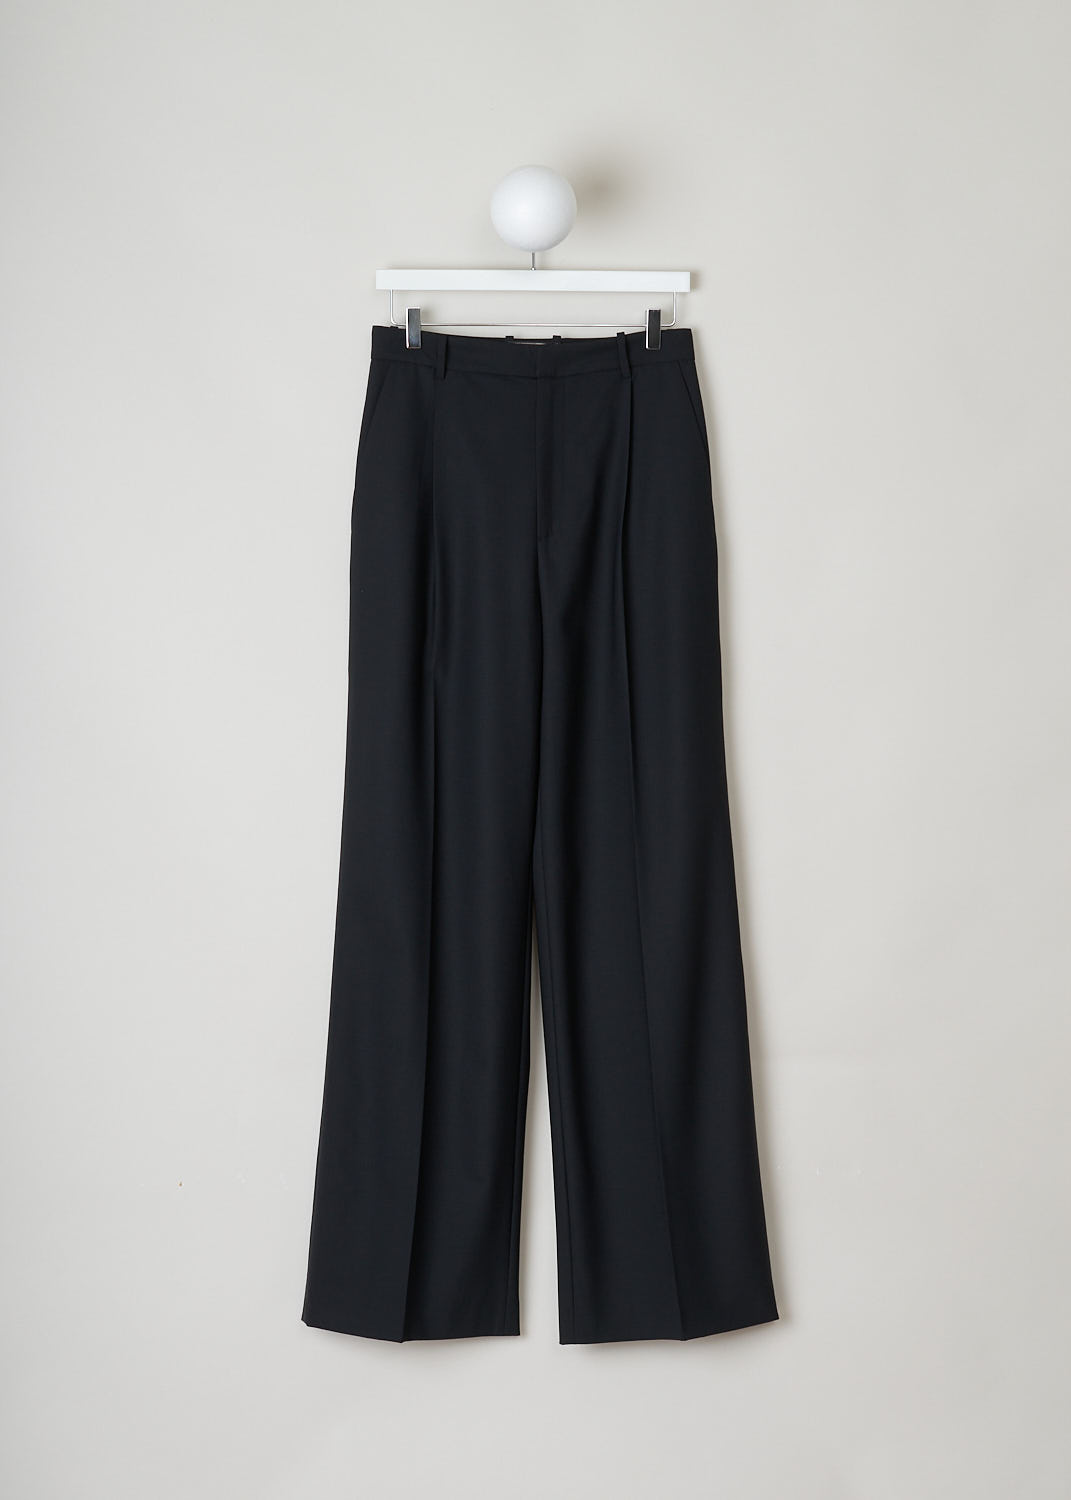 PLAN C, BLACK DRESS PANTS, PNCAA55L00_TP016_00N99, Black, Front, These black dress pants has a clasp and zip closure and belt loops. In the front, these pants have slanted pockets and centre pleats run along the length of the legs. In the back, flap welt pockets with a button can be found. The pant legs flare out slightly.  
